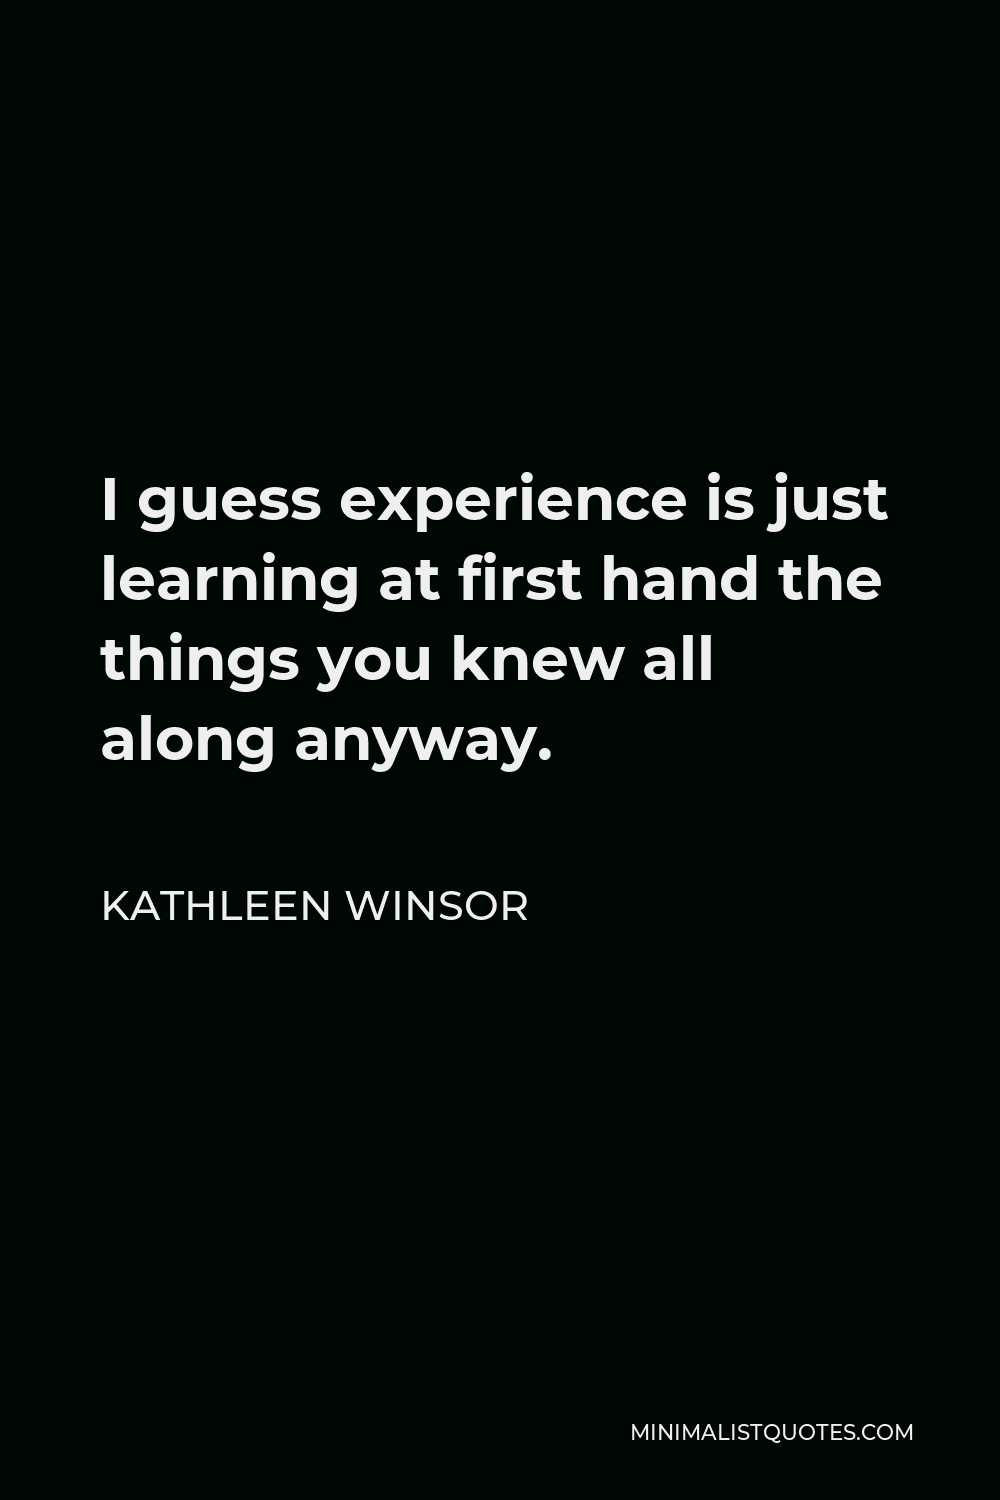 Kathleen Winsor Quote - I guess experience is just learning at first hand the things you knew all along anyway.